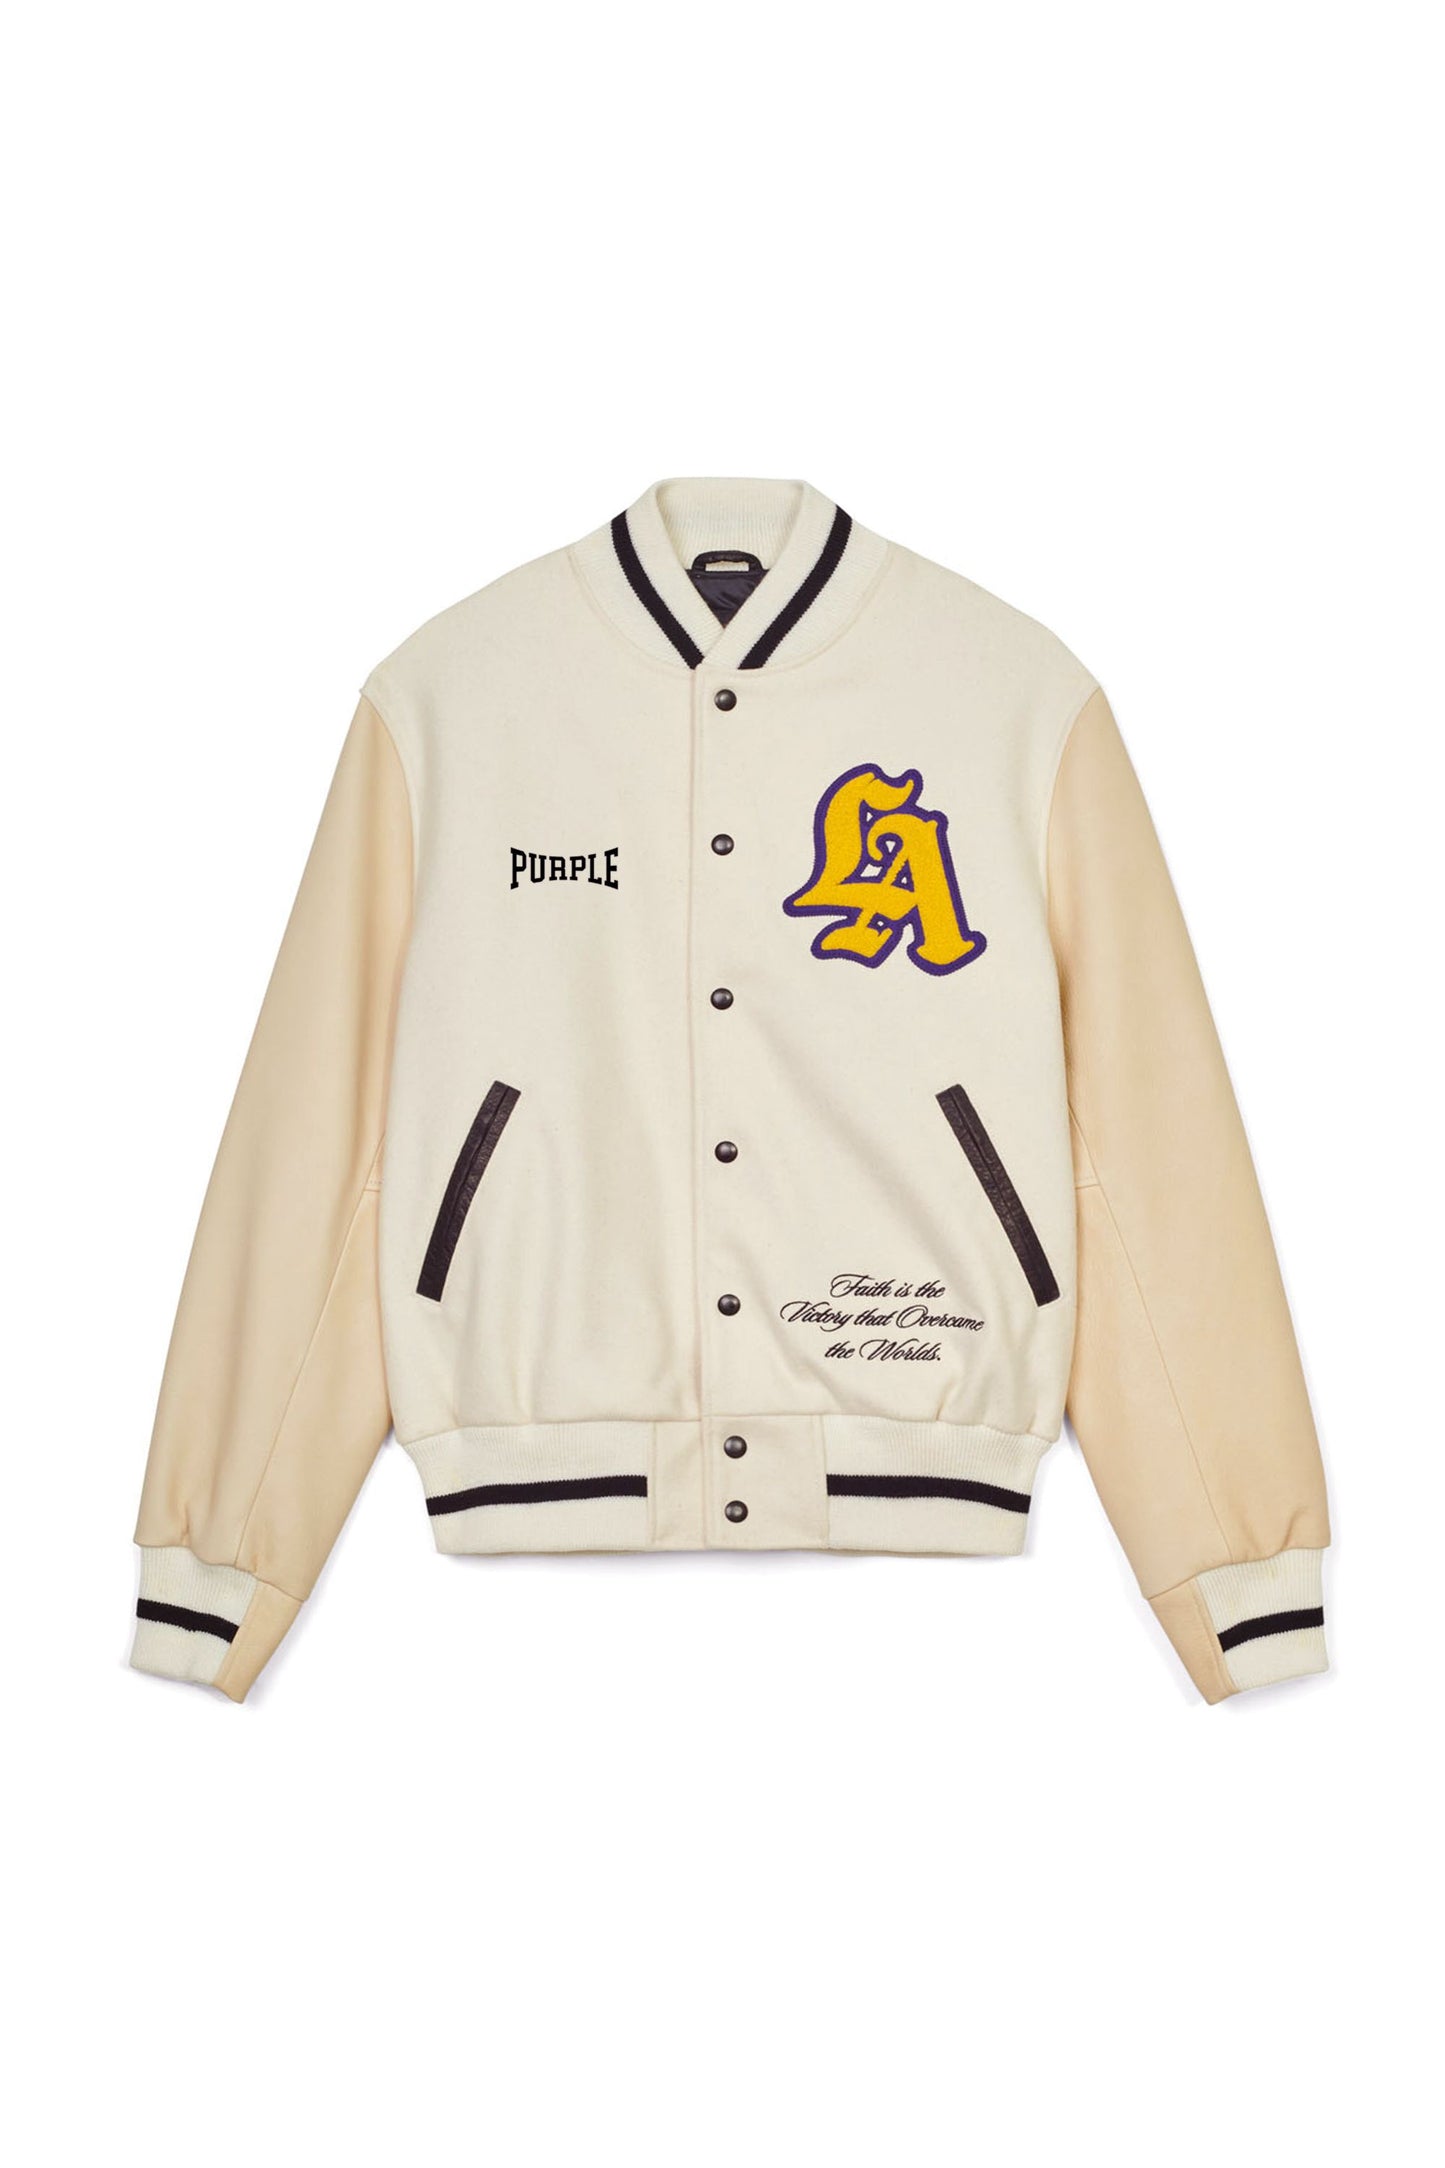 P320 LETTERMAN JACKET - Exclusive Golden Bear White and Gold